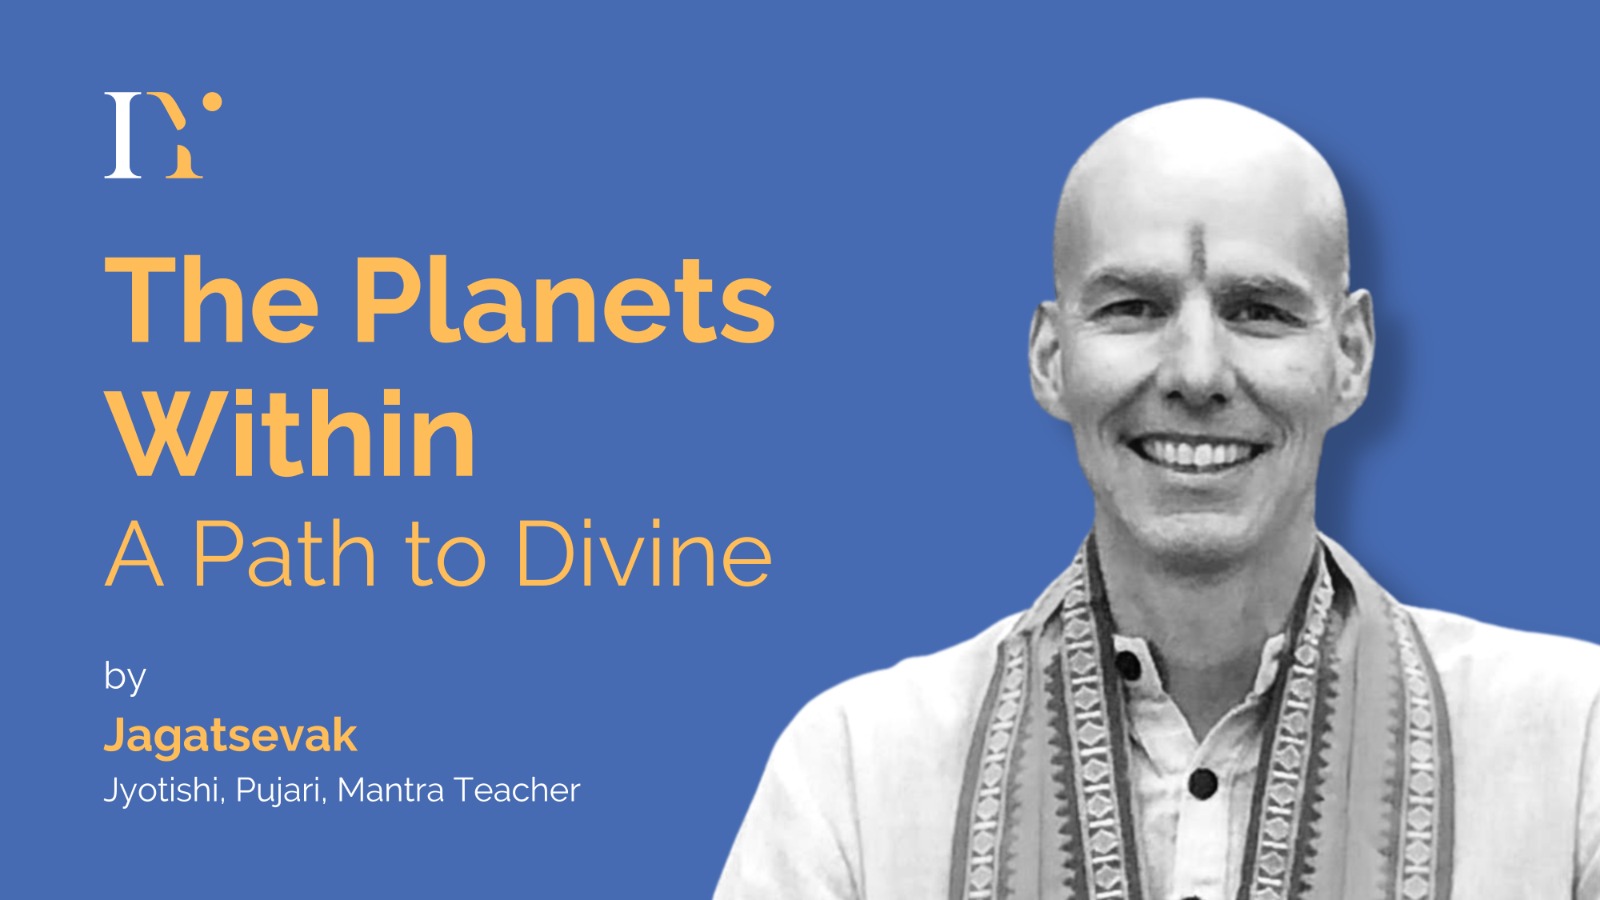 The Planets Within ~ A Path to Divine by Jagatsevak